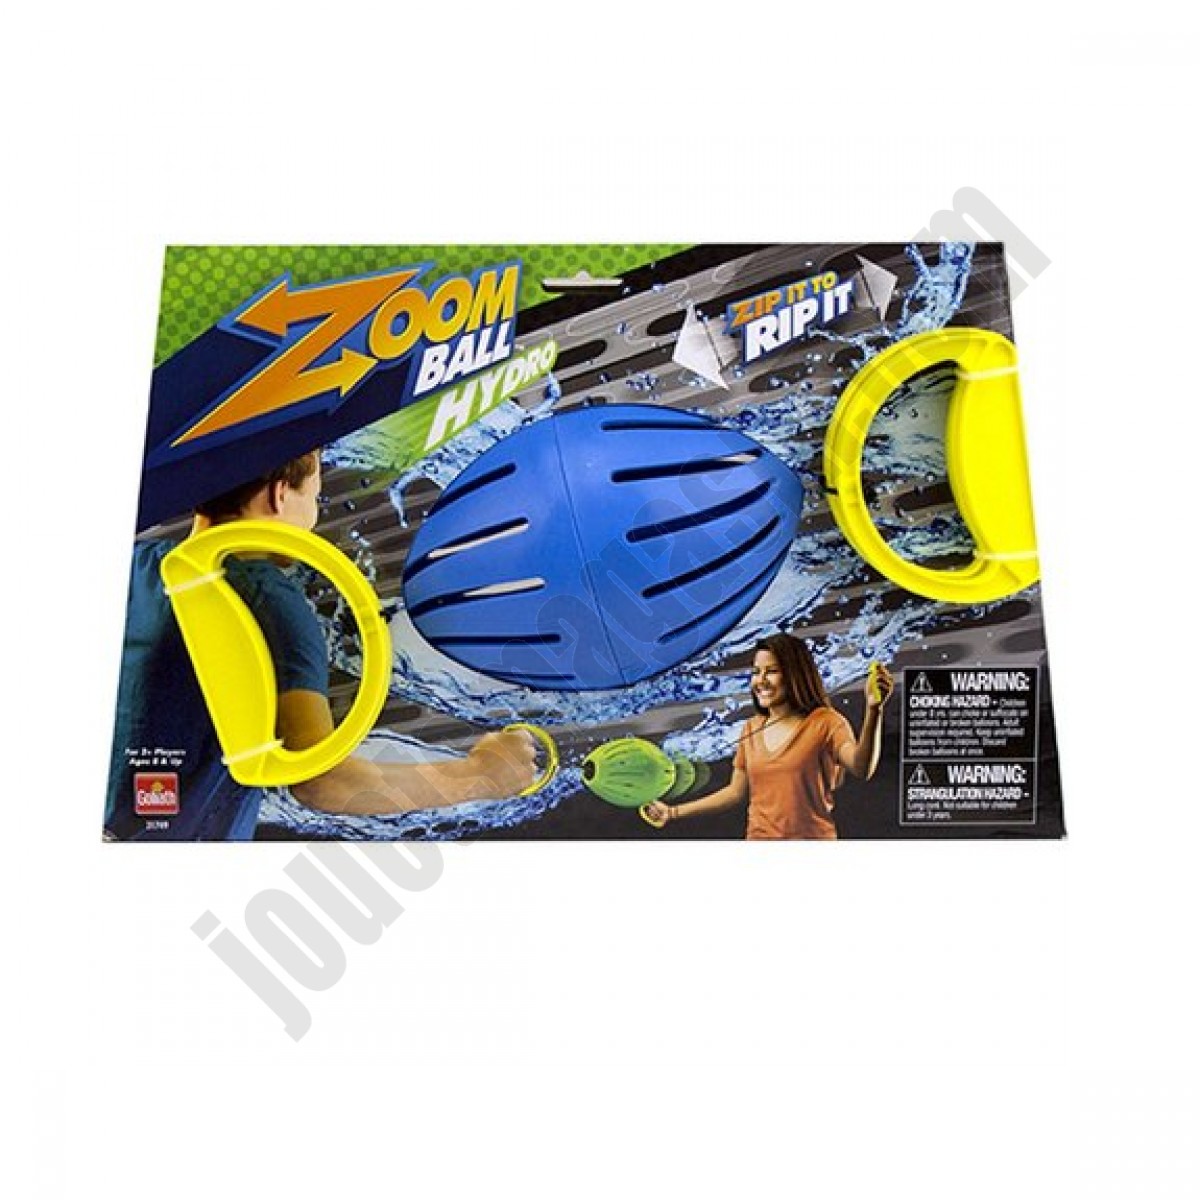 Zoom ball hydro - déstockage - Zoom ball hydro - déstockage